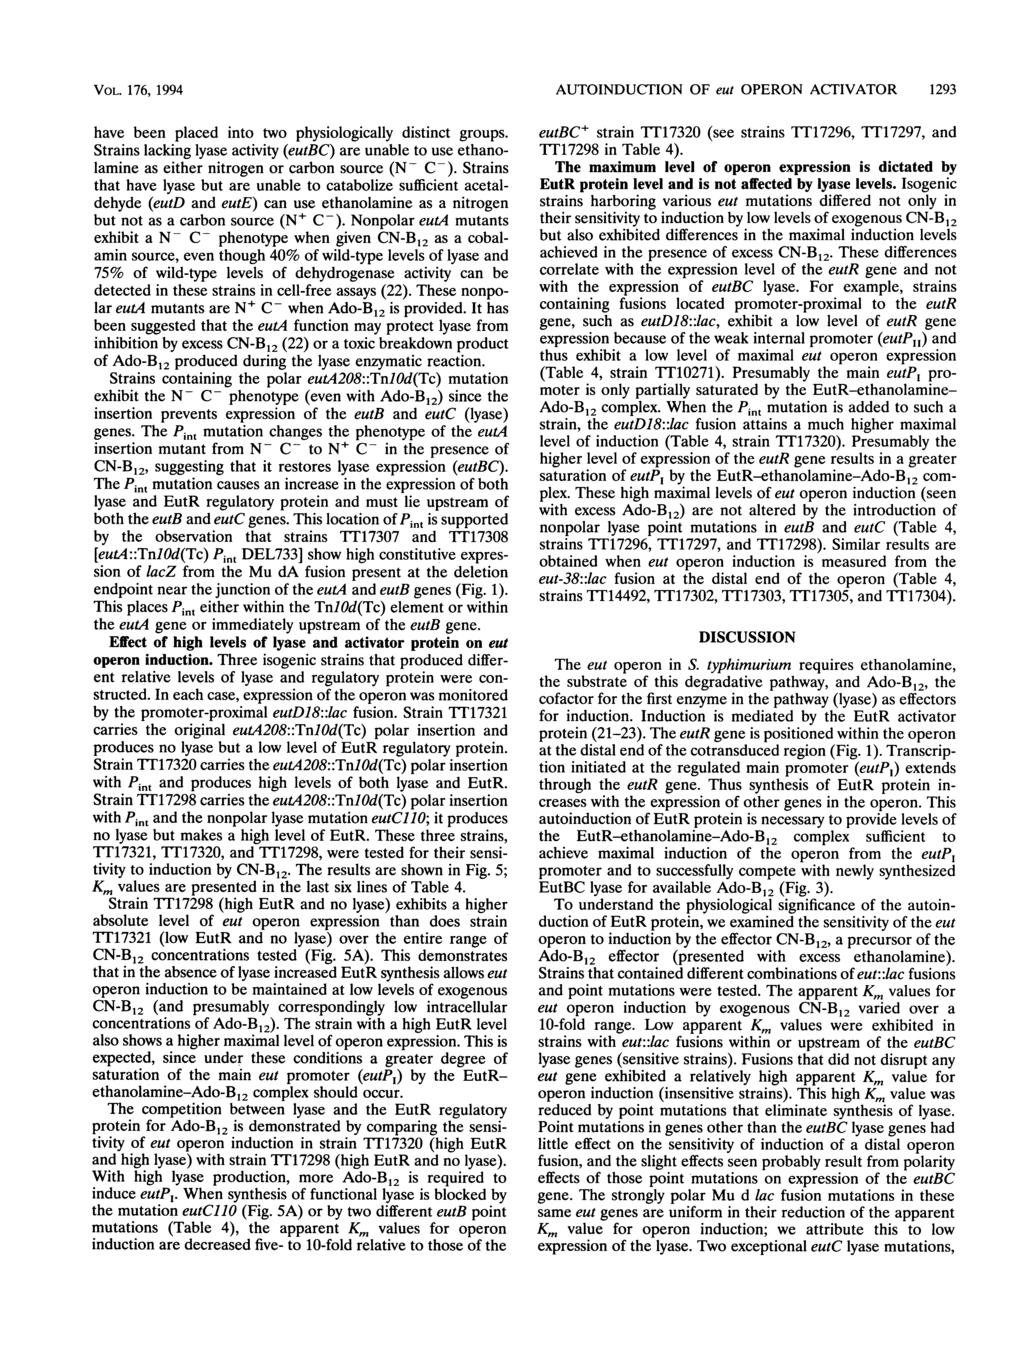 VOL. 176, 1994 have been placed into two physiologically distinct groups. Strains lacking lyase activity (eutbc) are unable to use ethanolamine as either nitrogen or carbon source (N- C-).